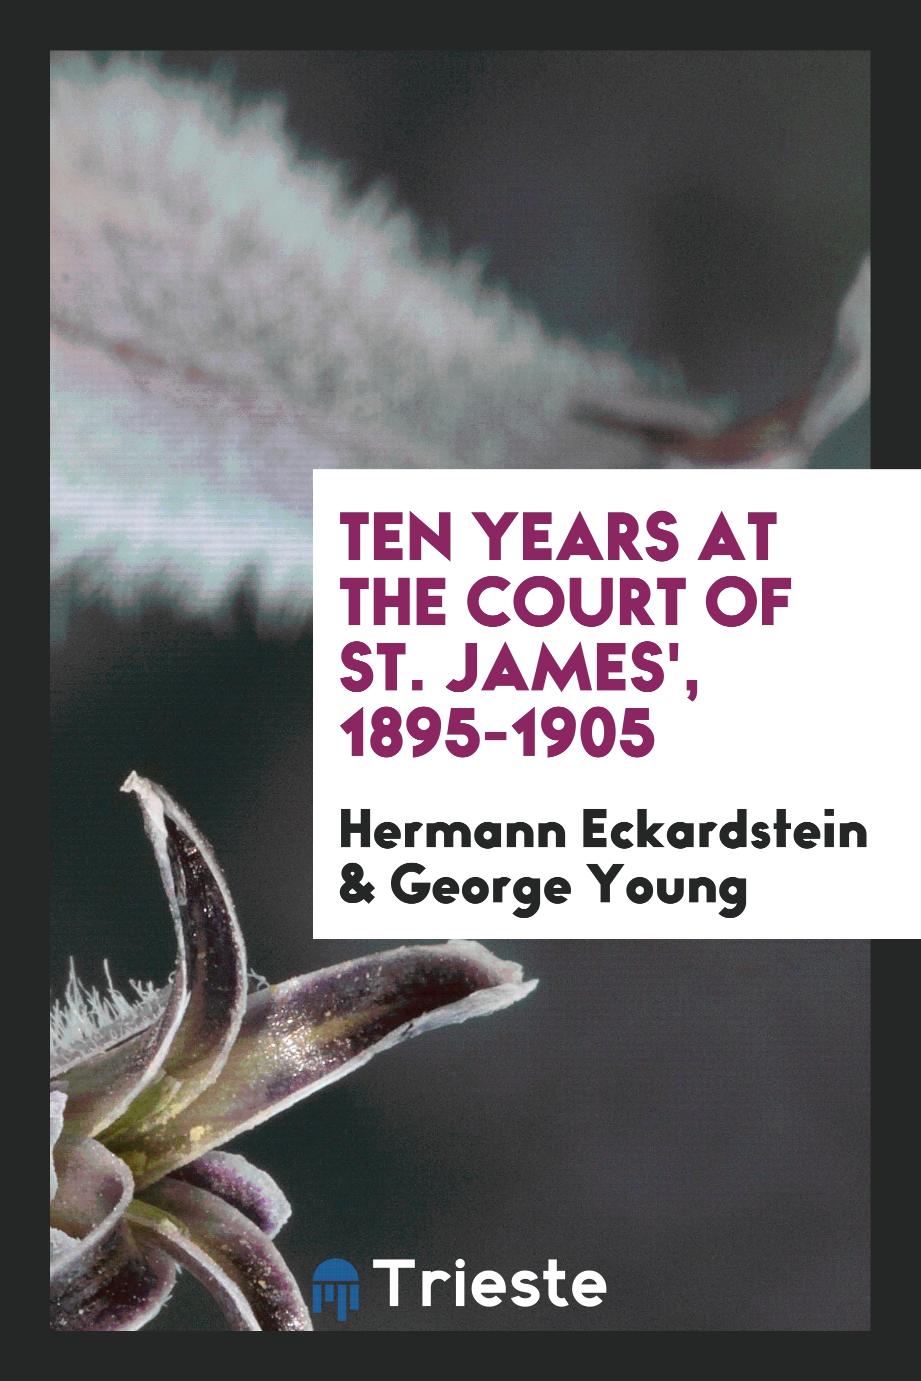 Ten years at the court of St. James', 1895-1905